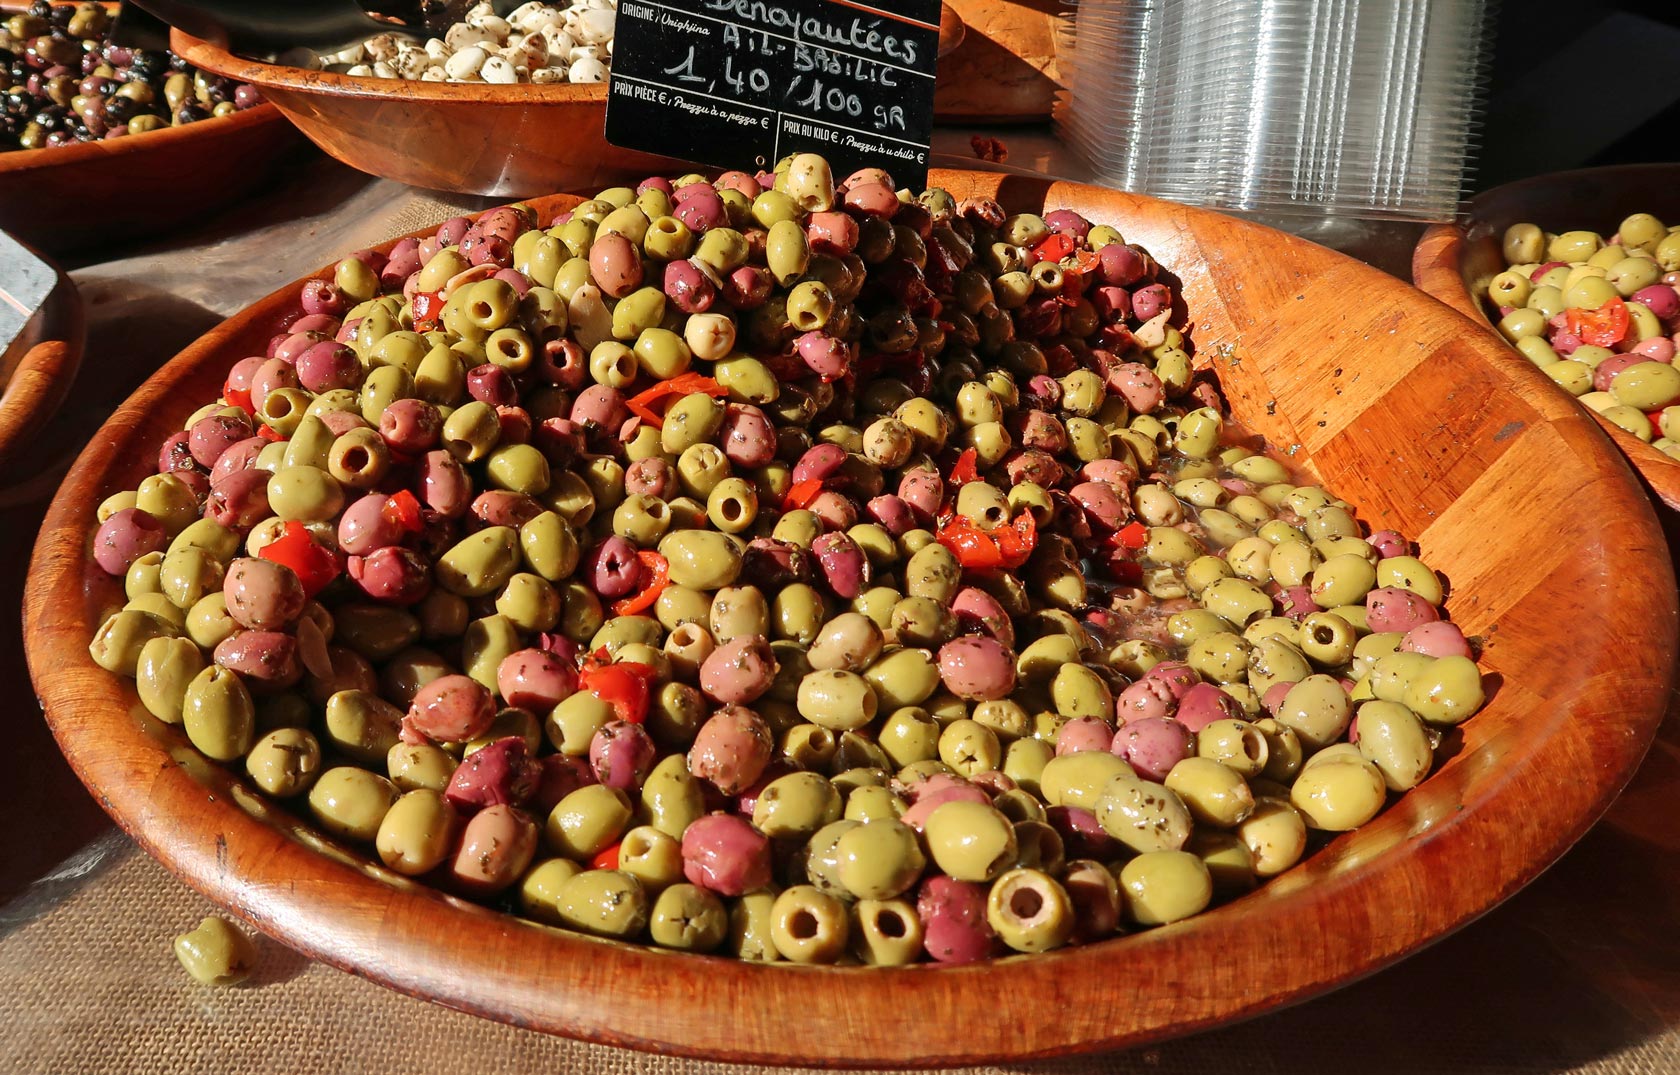 Ajaccio, Corsica, France. Mediterranean culture and colour on cruise vacation. Food in artisan market. Large bowl of olives